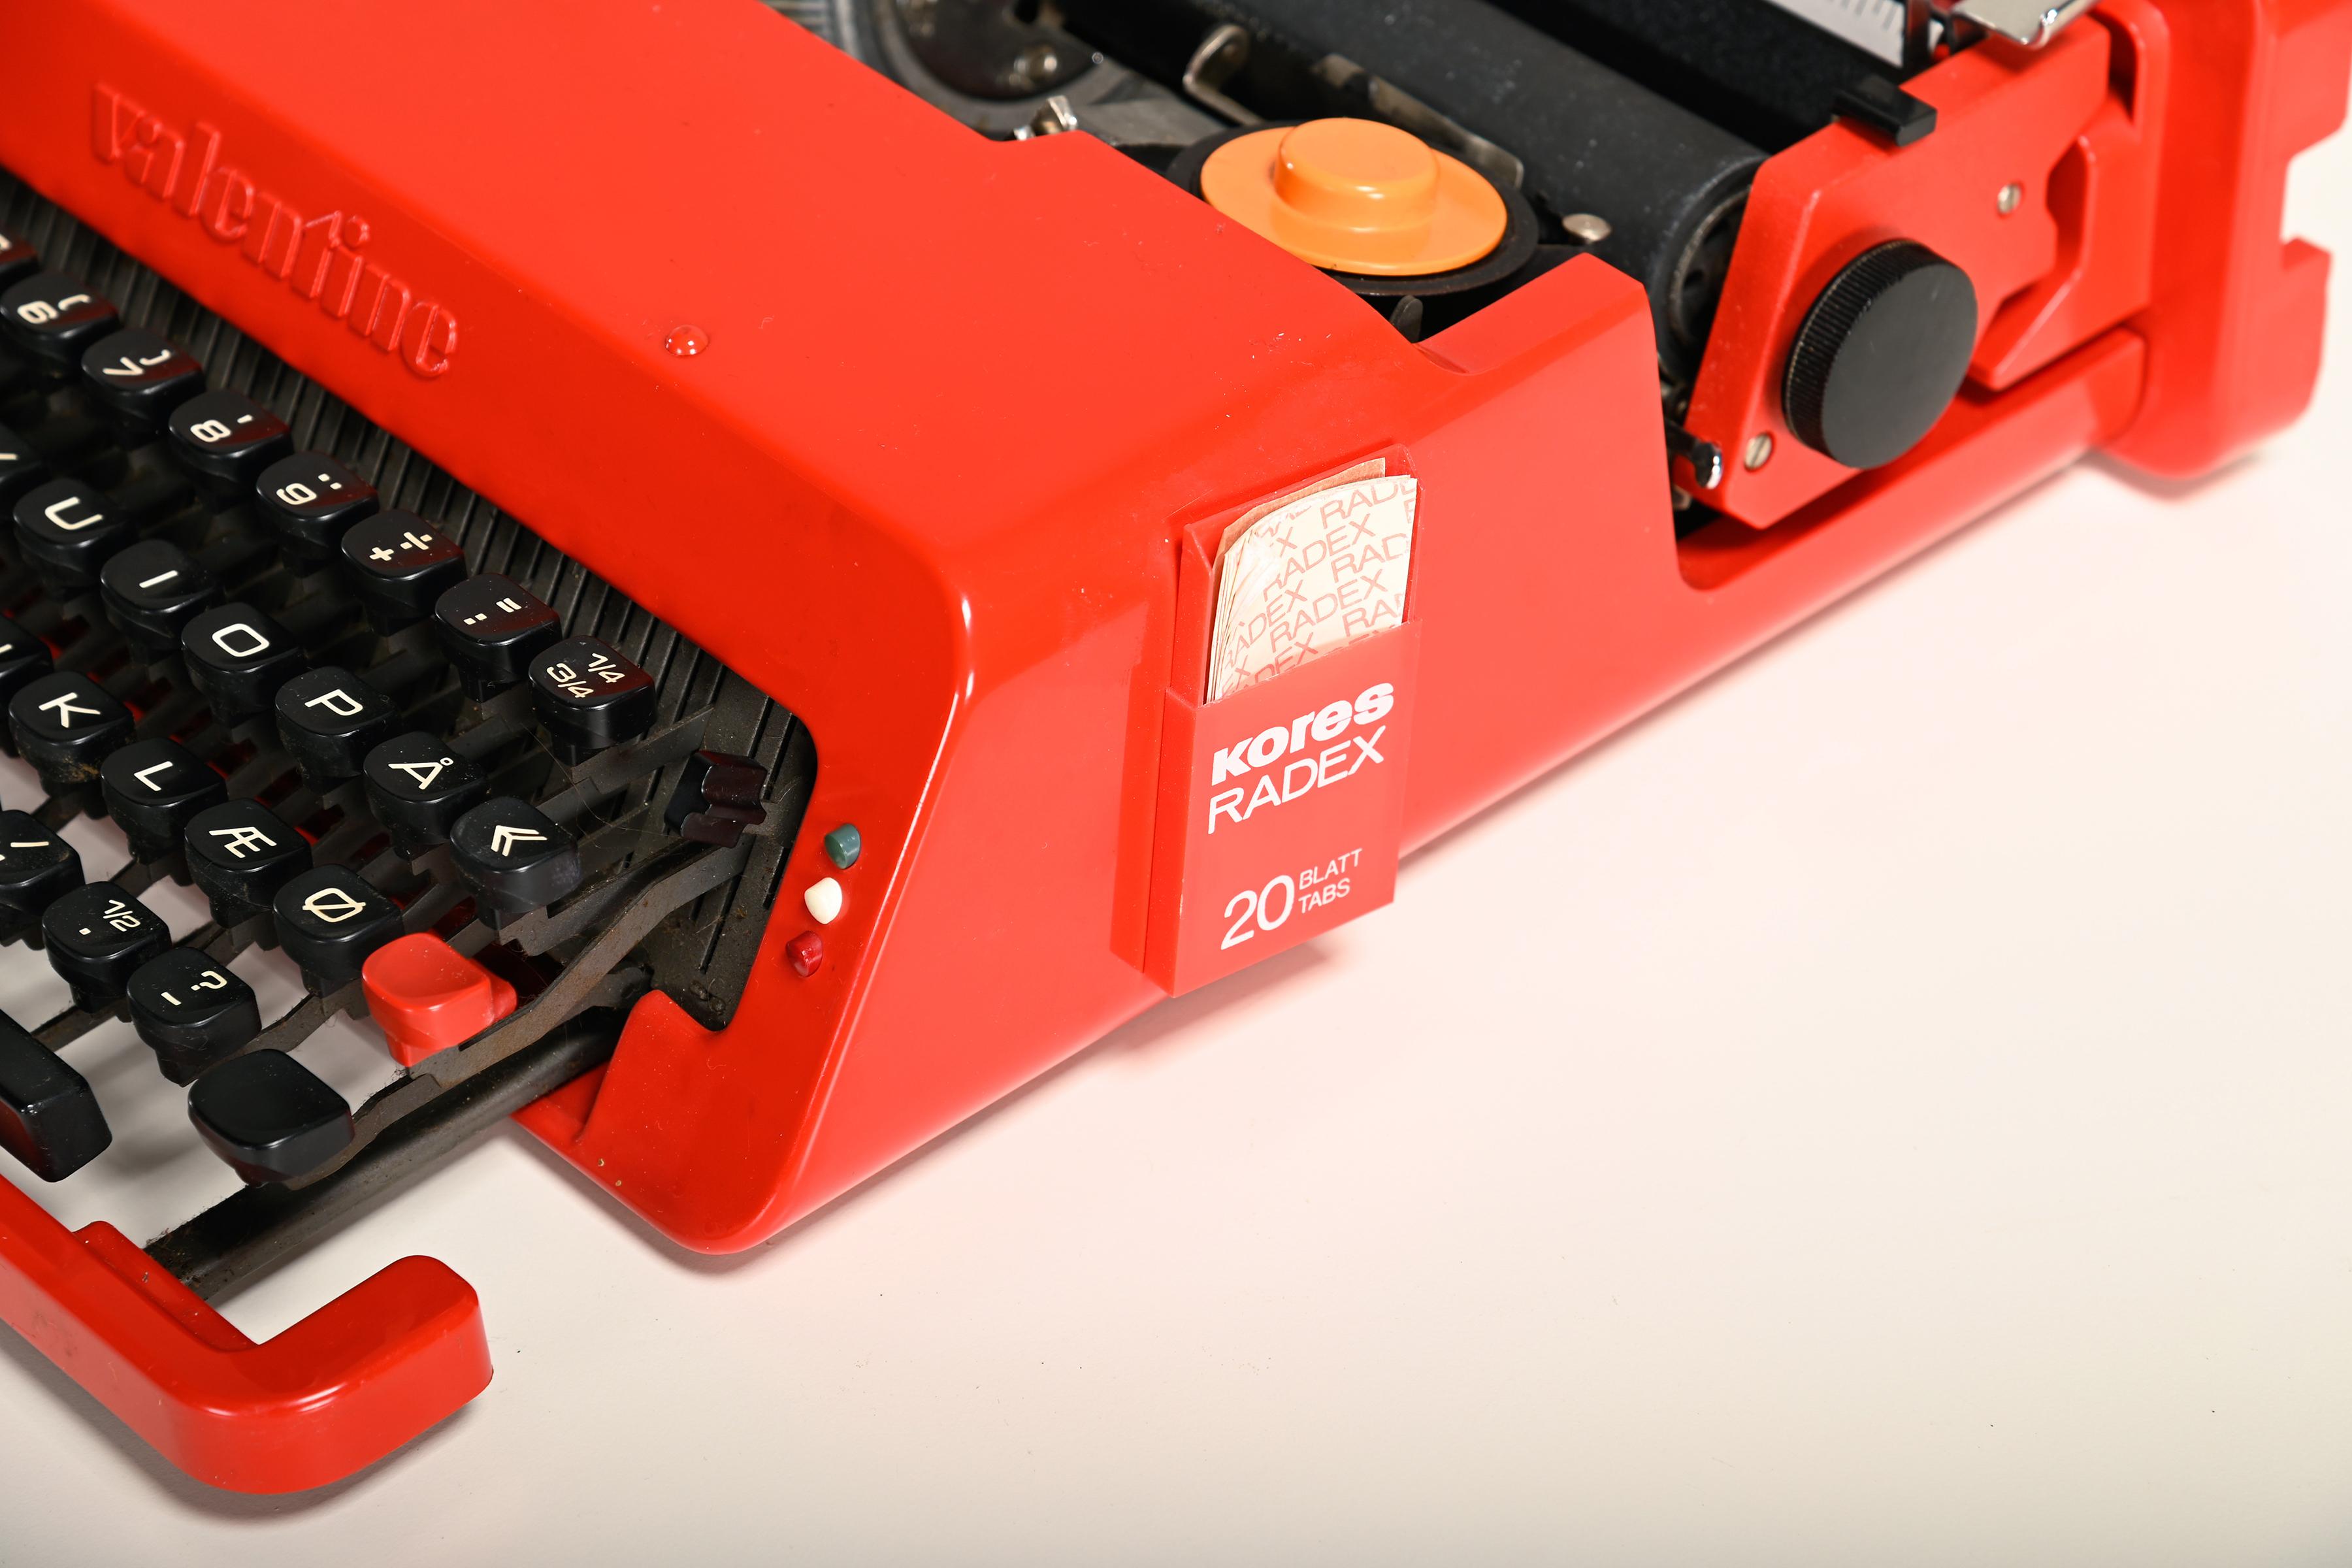 Metal Ettore Sottsass red Valentine Typewriter for Olivetti, Italy